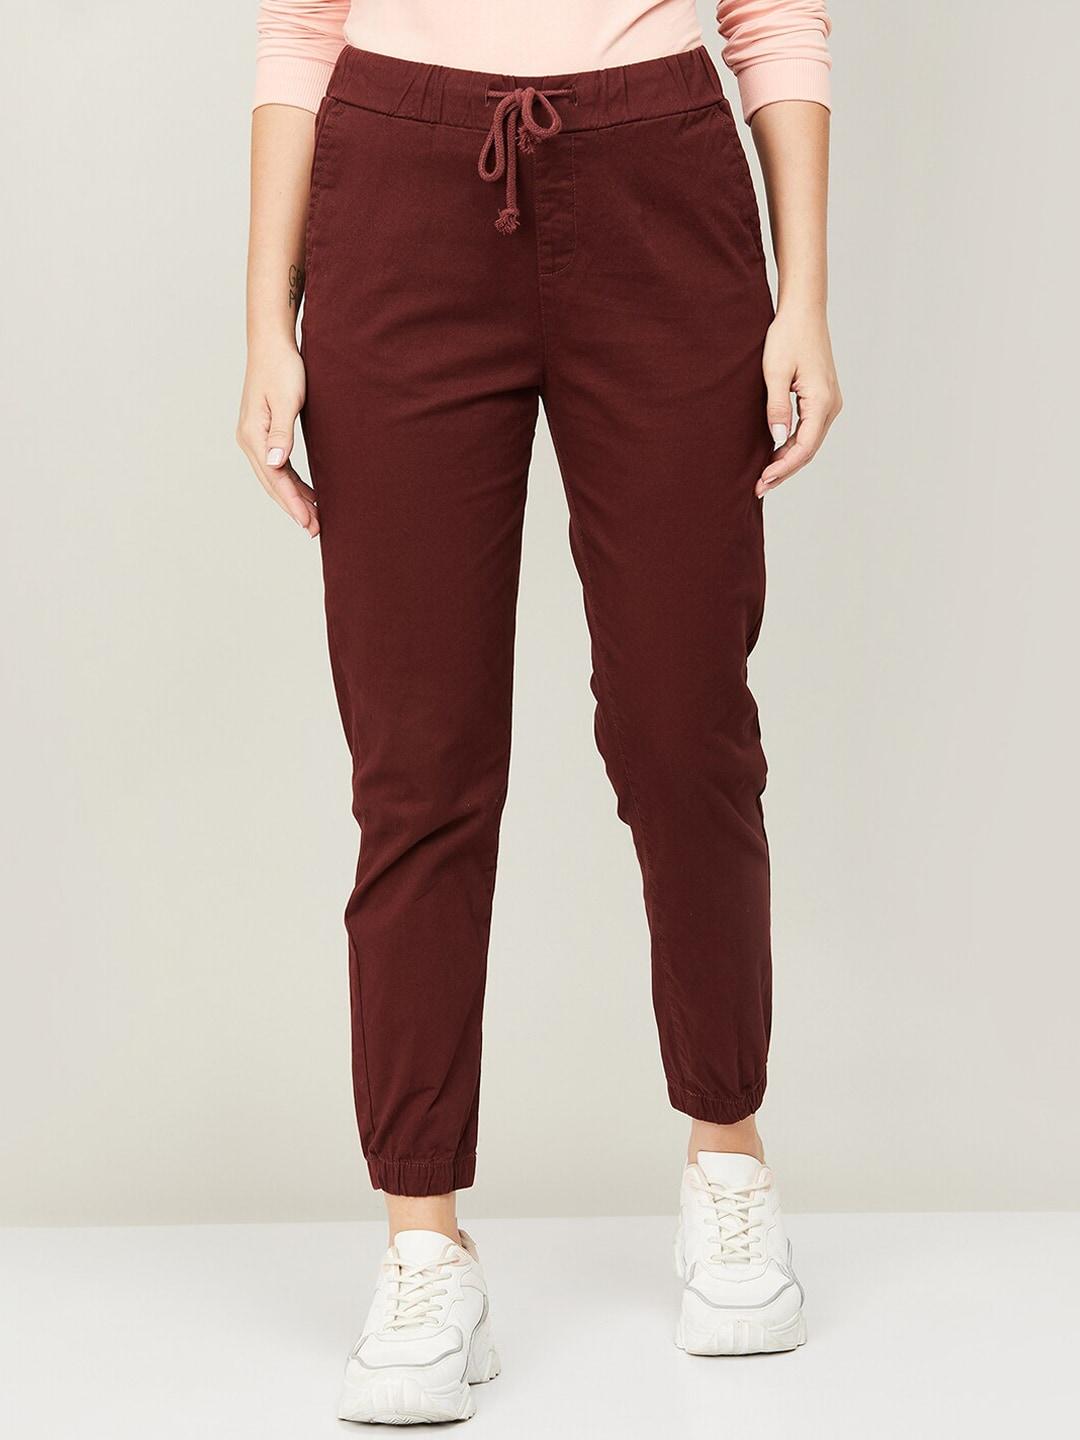 code by lifestyle women brown solid cotton joggers